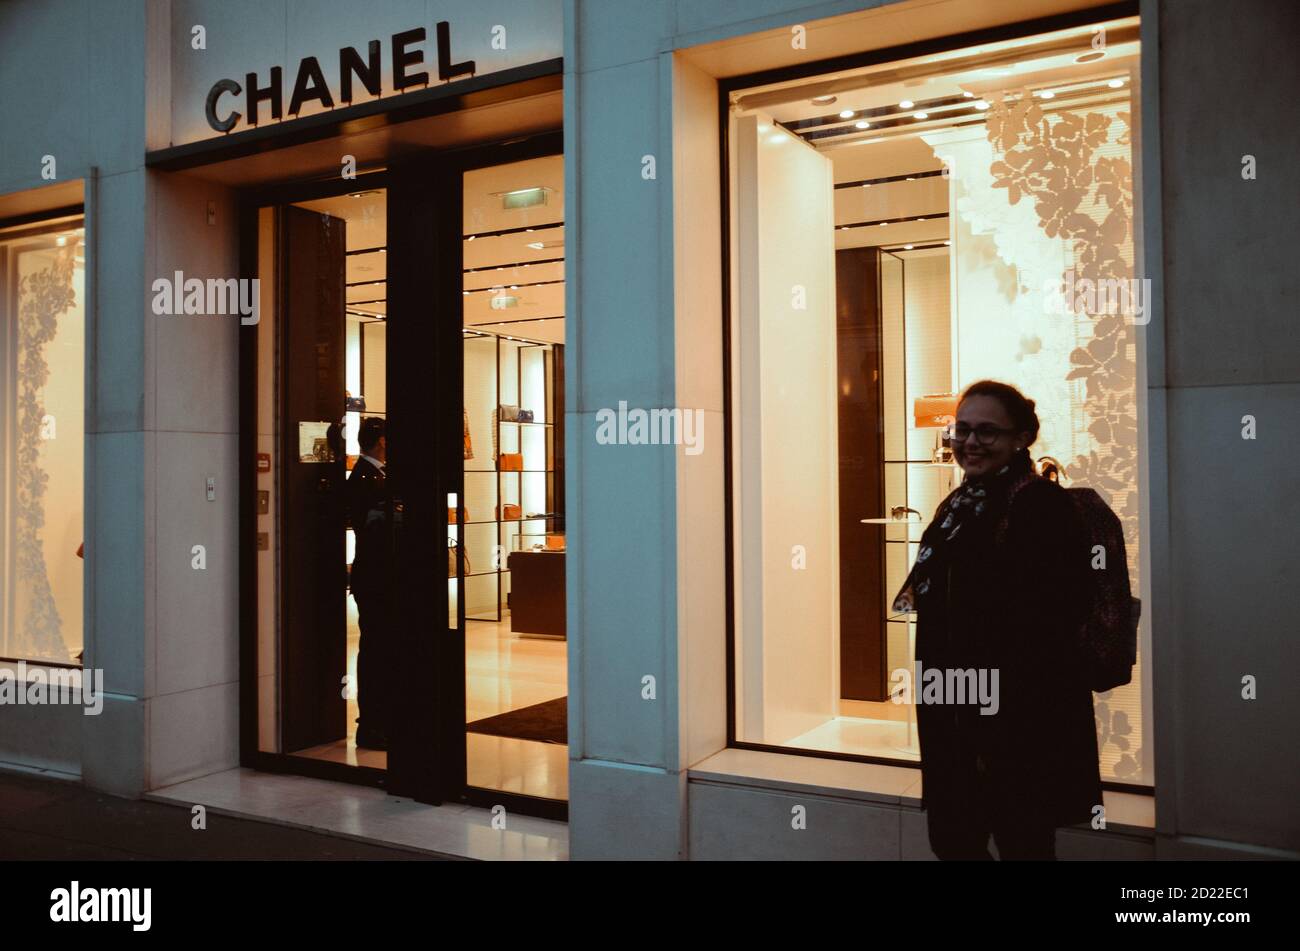 PARIS, FRANCE - Sep 01, 2020: Beautiful landscape shot of a girl in front  of a Chanel store in Paris, France Stock Photo - Alamy